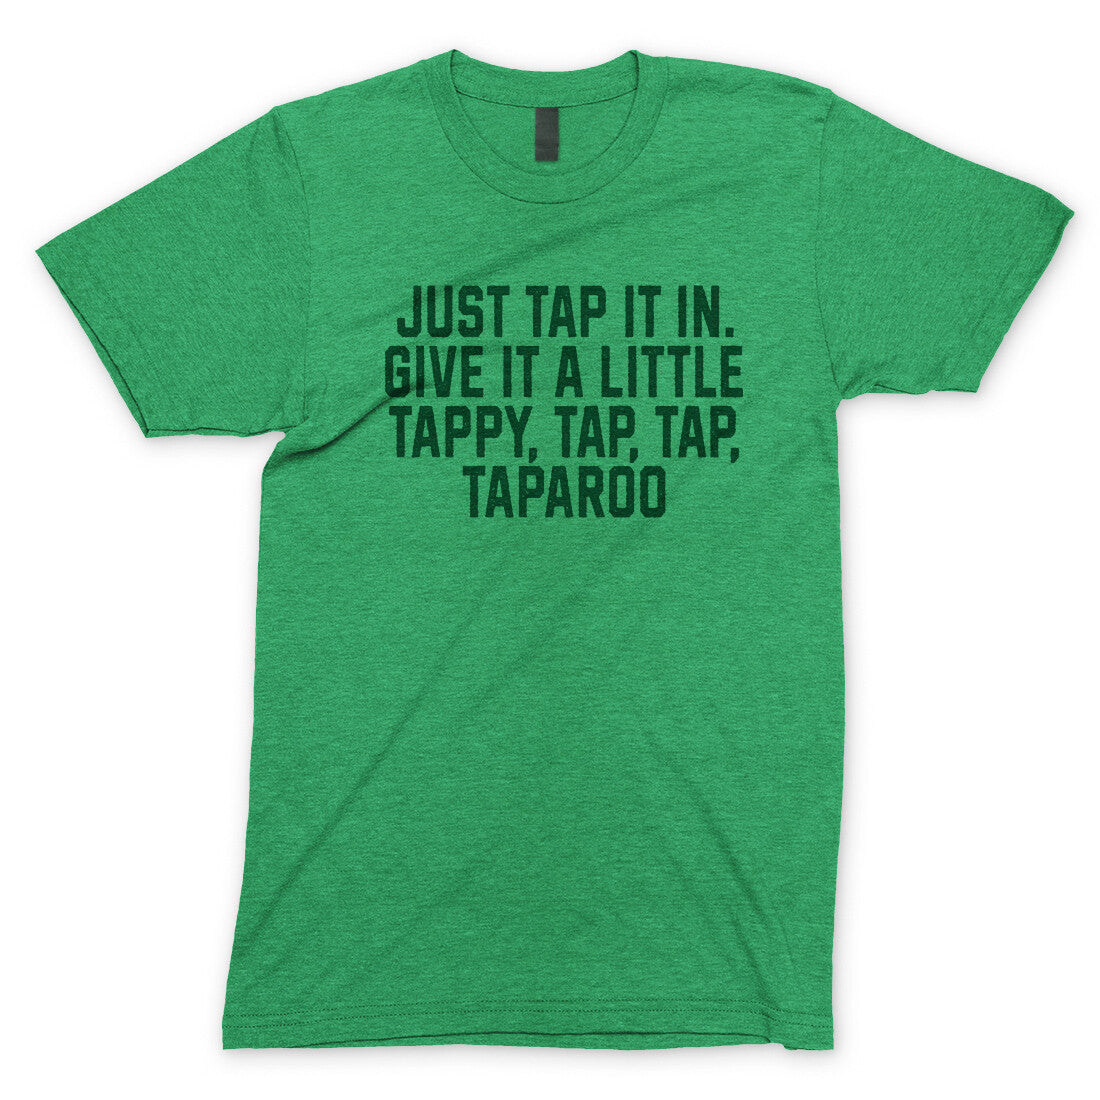 Just Tap it in Give it a Little Tappy Tap Tap Taparoo in Heather Irish Green Color